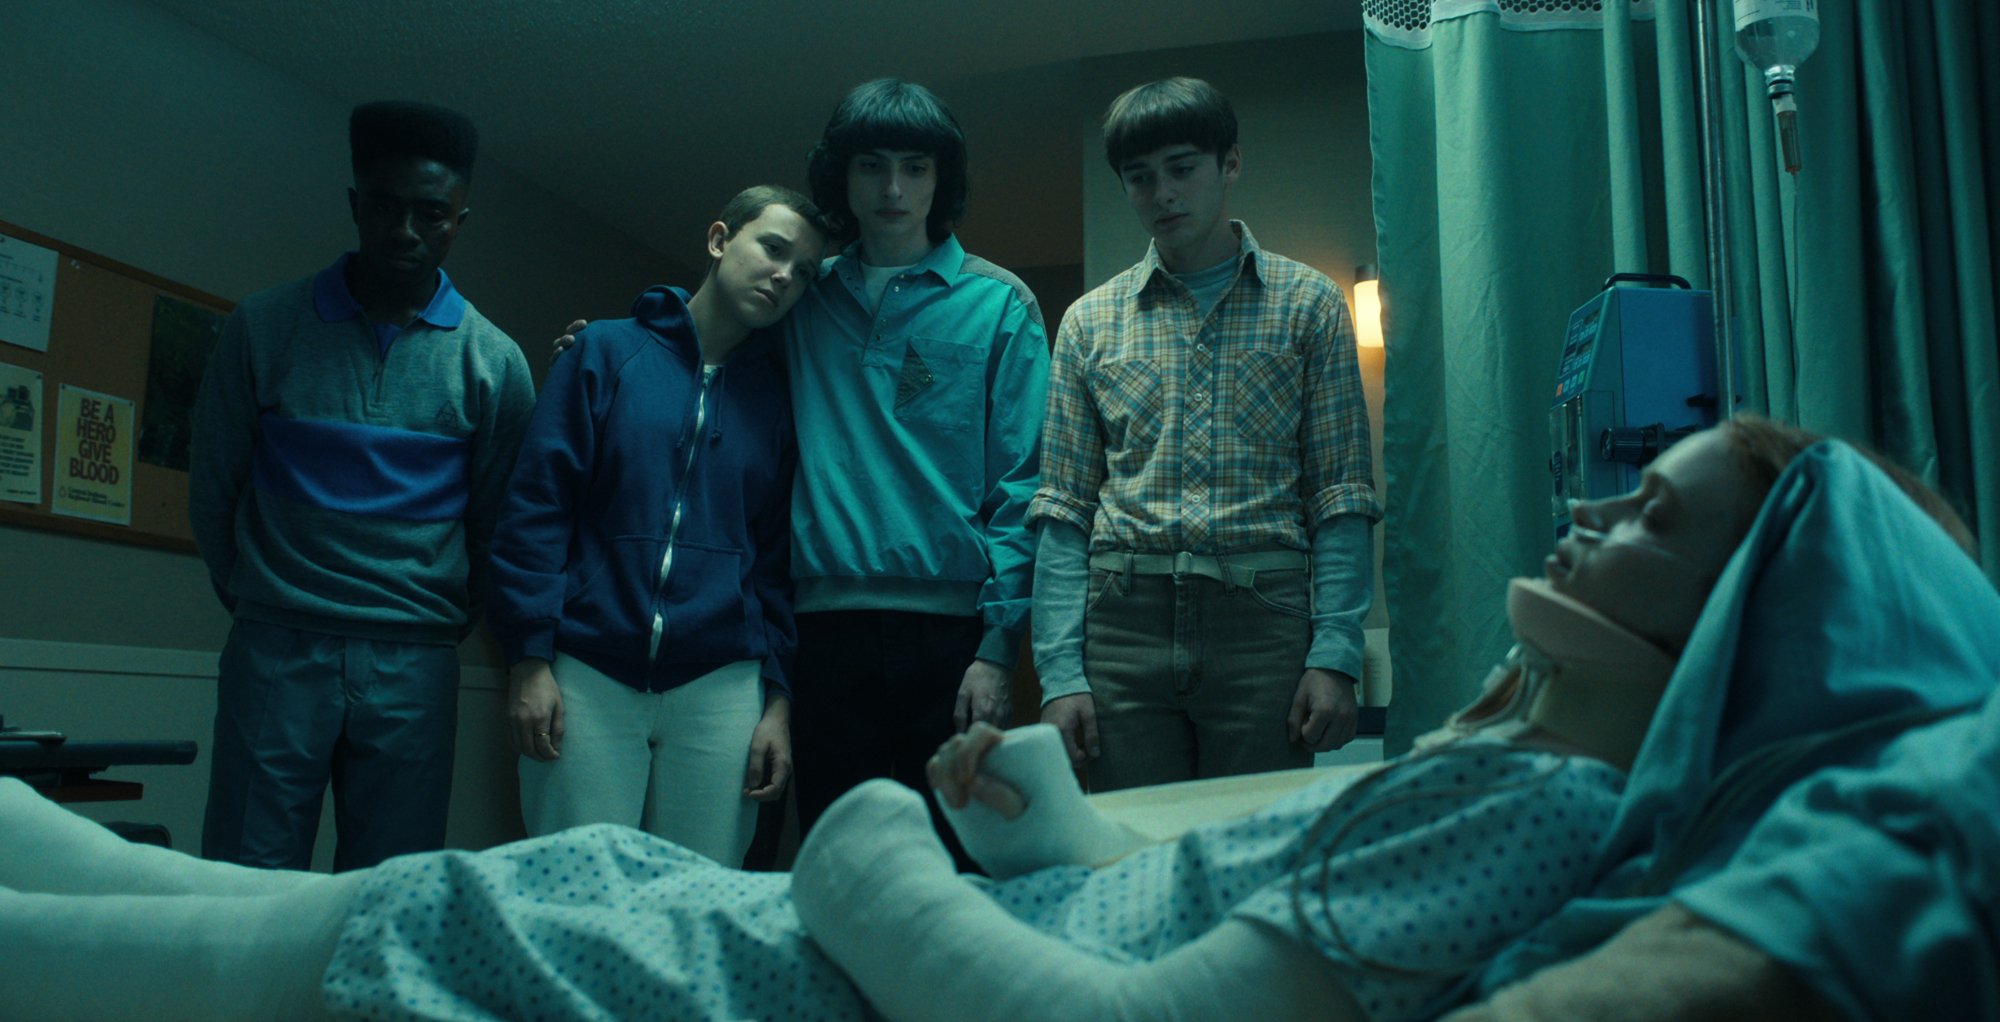 Lucas, Eleven, Mike and Will looking at Max in hospital in 'Stranger Things' 4 Volume 2.